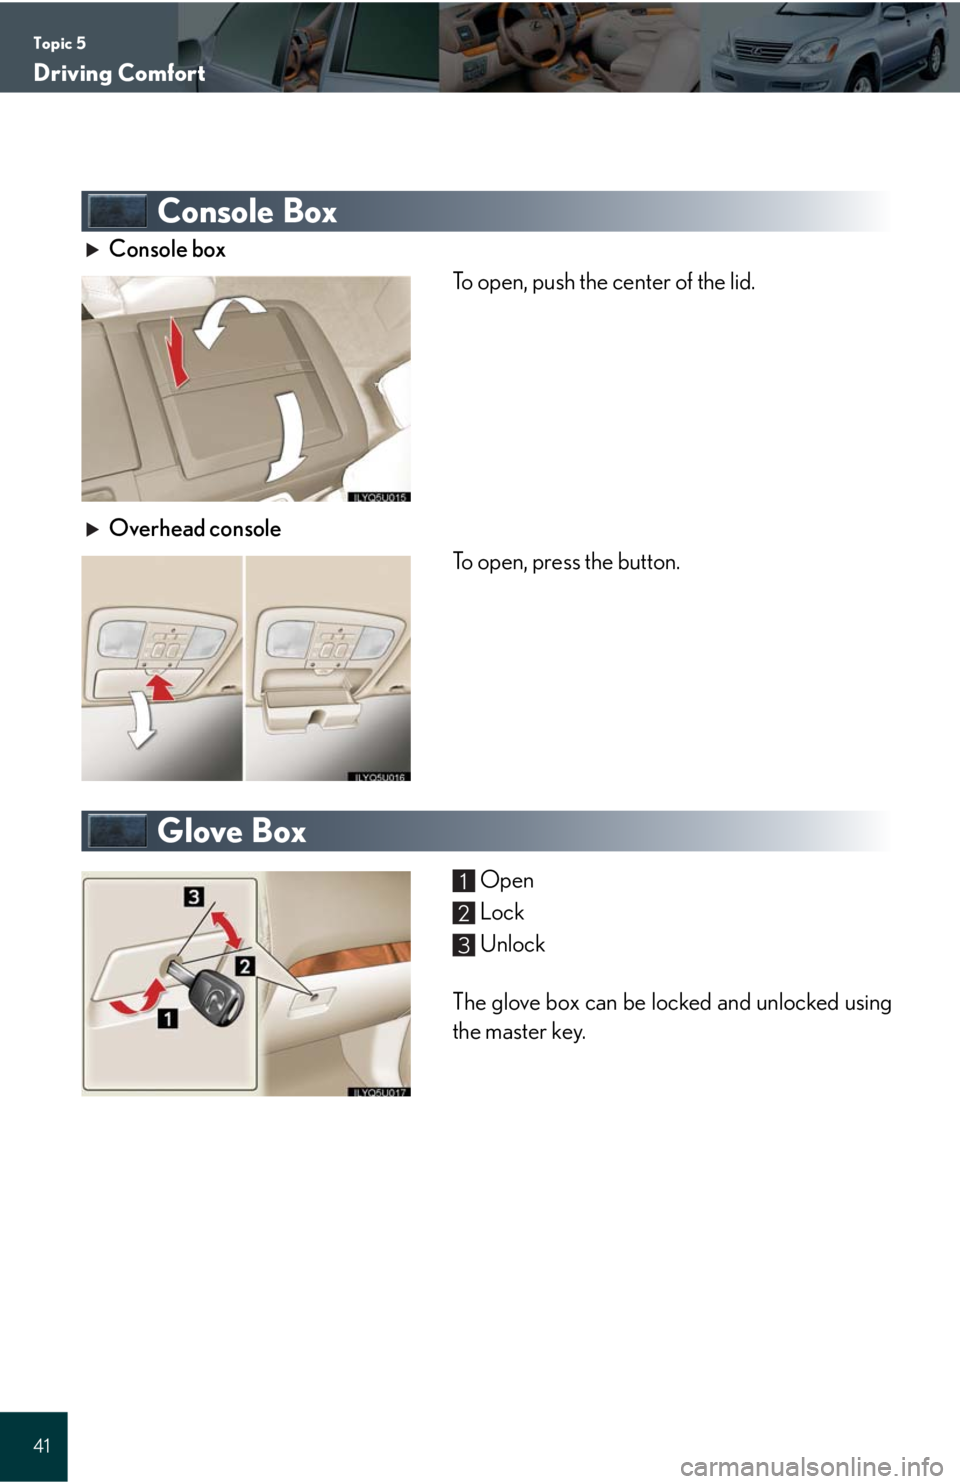 Lexus GX470 2008  Audio/Video System / LEXUS 2008 GX470 QUICK GUIDE OWNERS MANUAL (OM60D81U) Topic 5
Driving Comfort
41
Console Box
Console box
To open, push the center of the lid.
Overhead console
To open, press the button.
Glove Box
Open
Lock
Unlock
The glove box can be locked and unlocked 